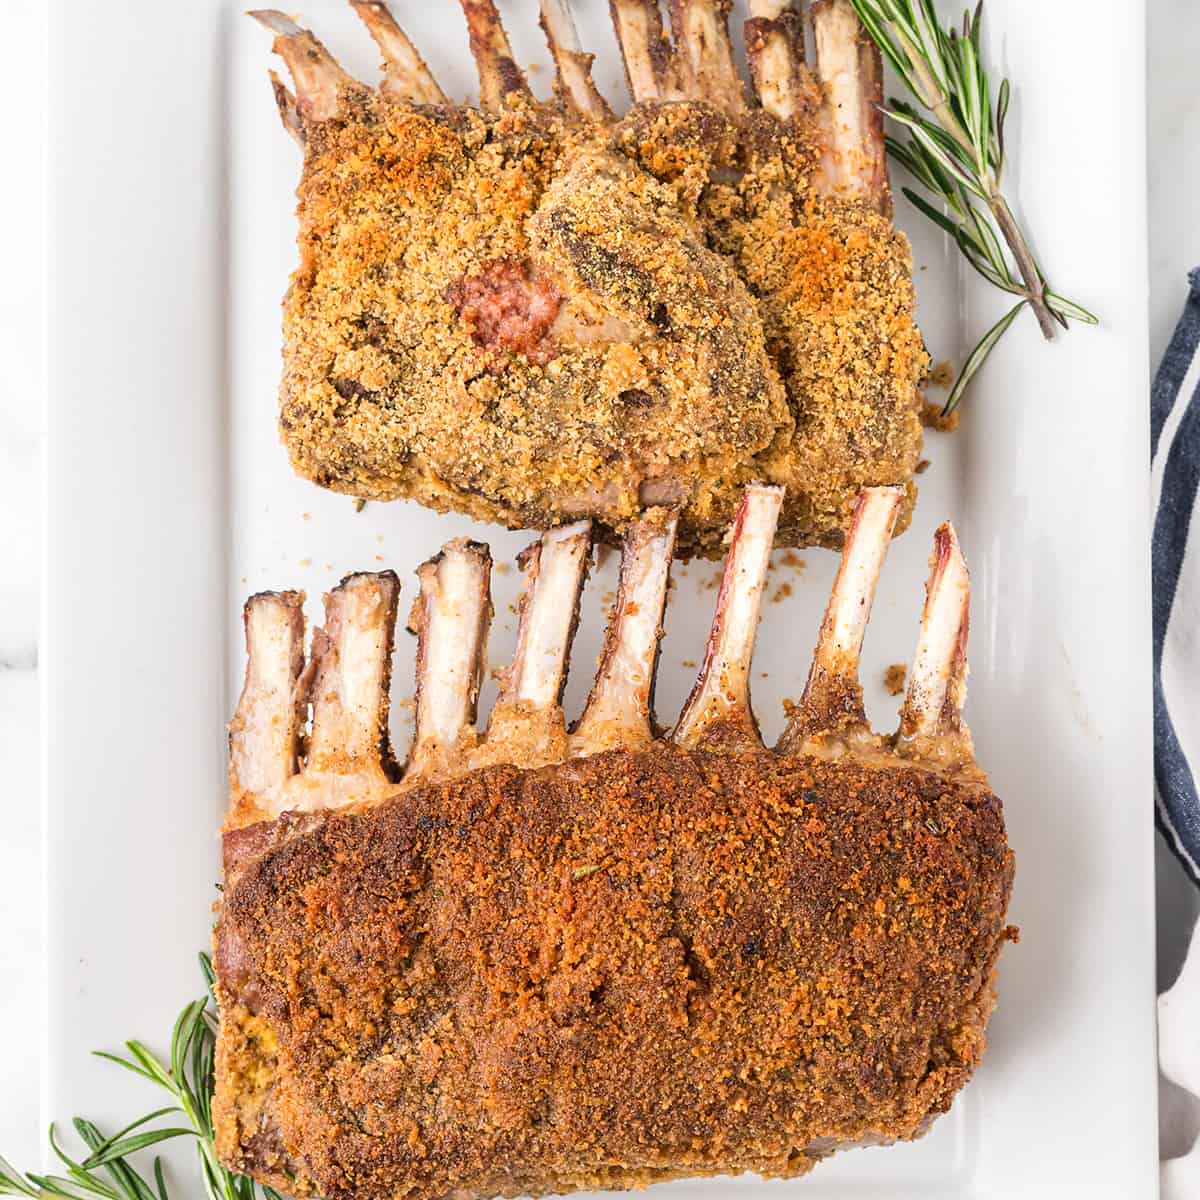 Oven Roasted Rack of Lamb